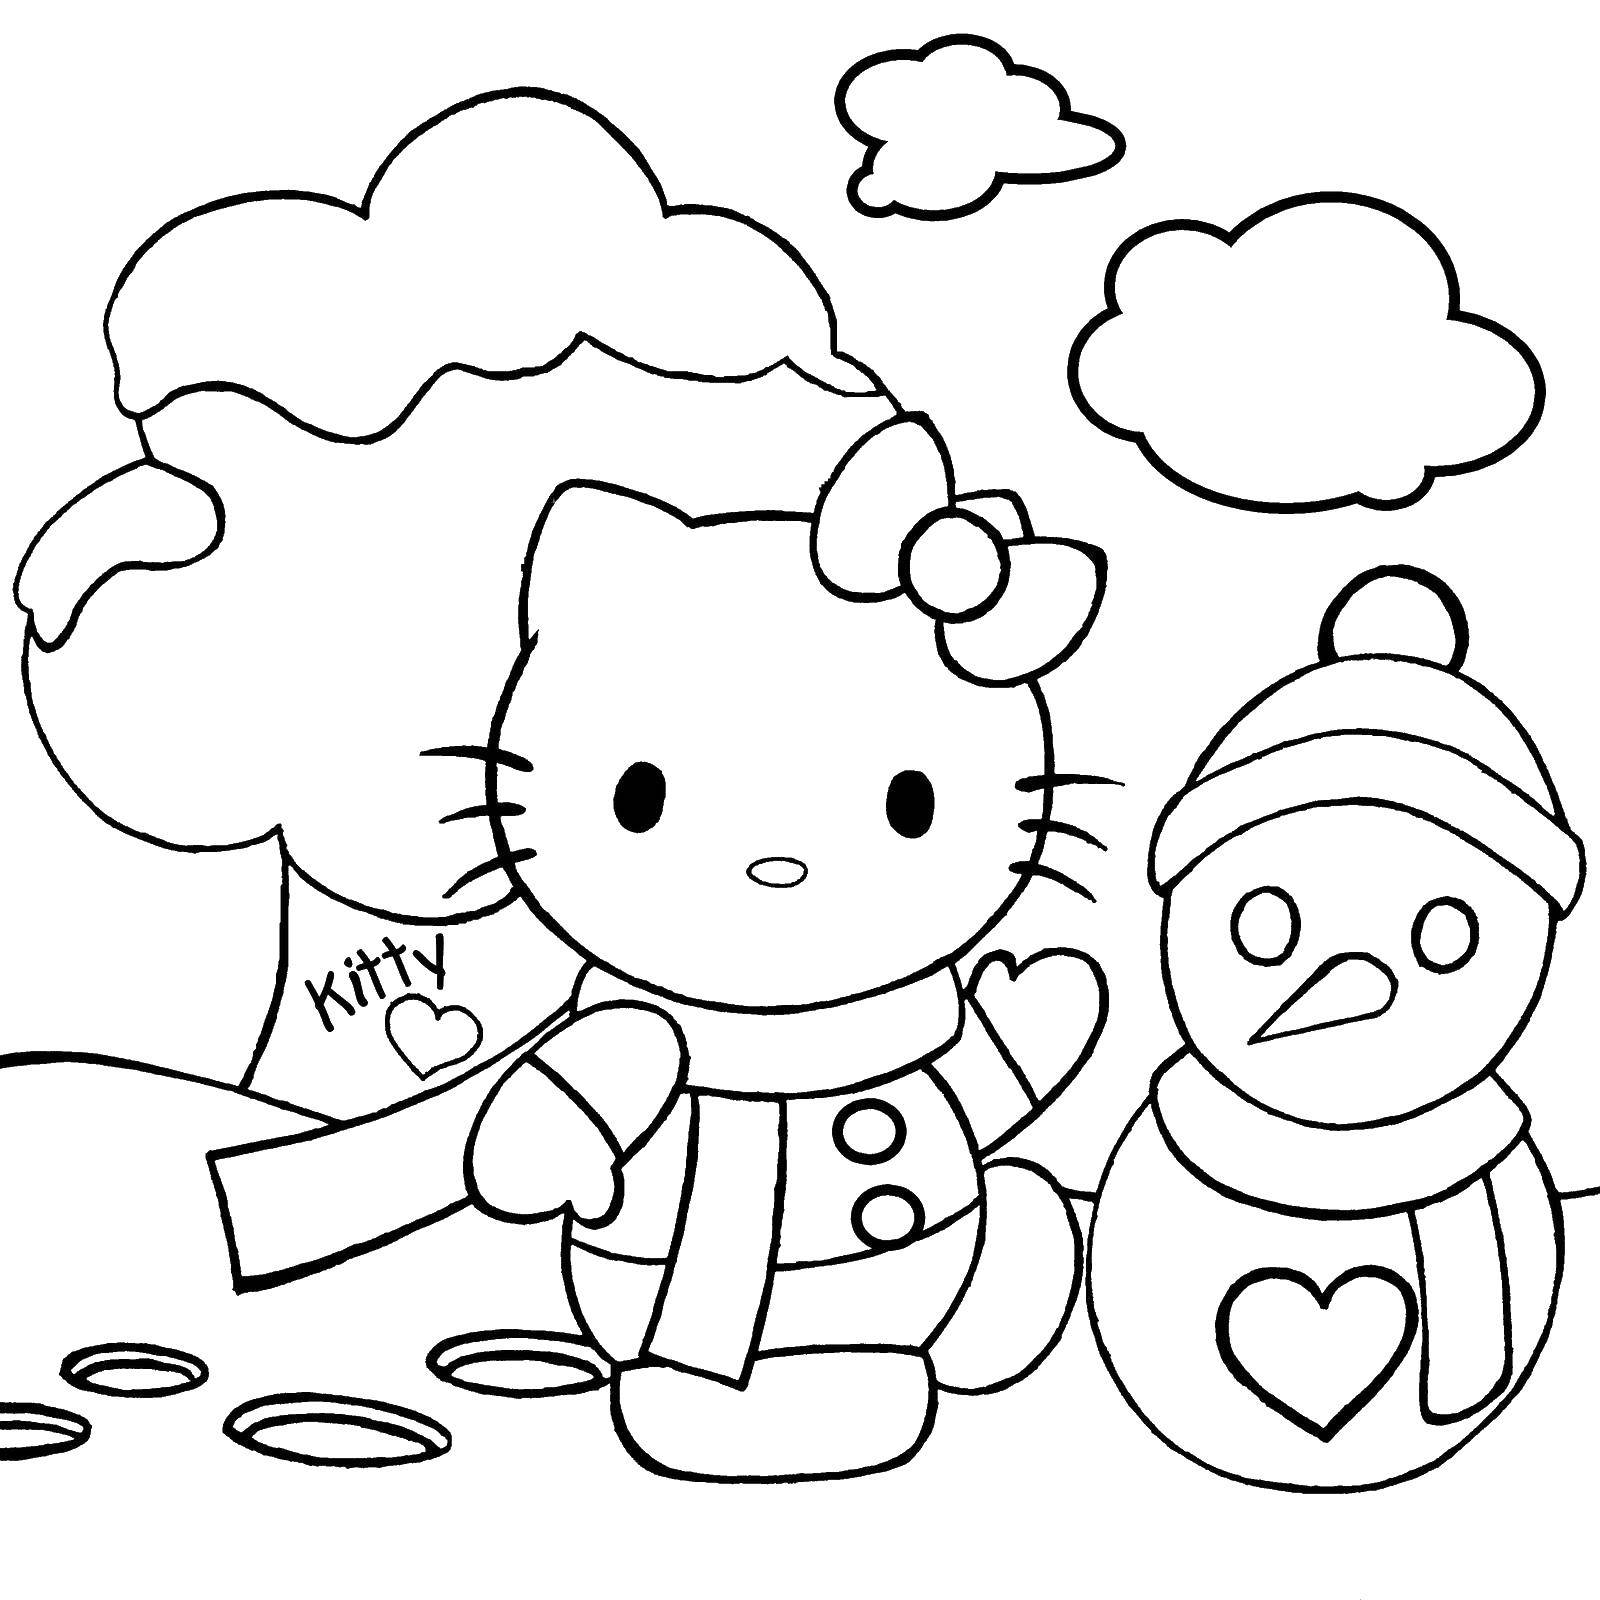 Coloring Kitty and snowman. Category coloring for little ones. Tags:  kitty, snowman.